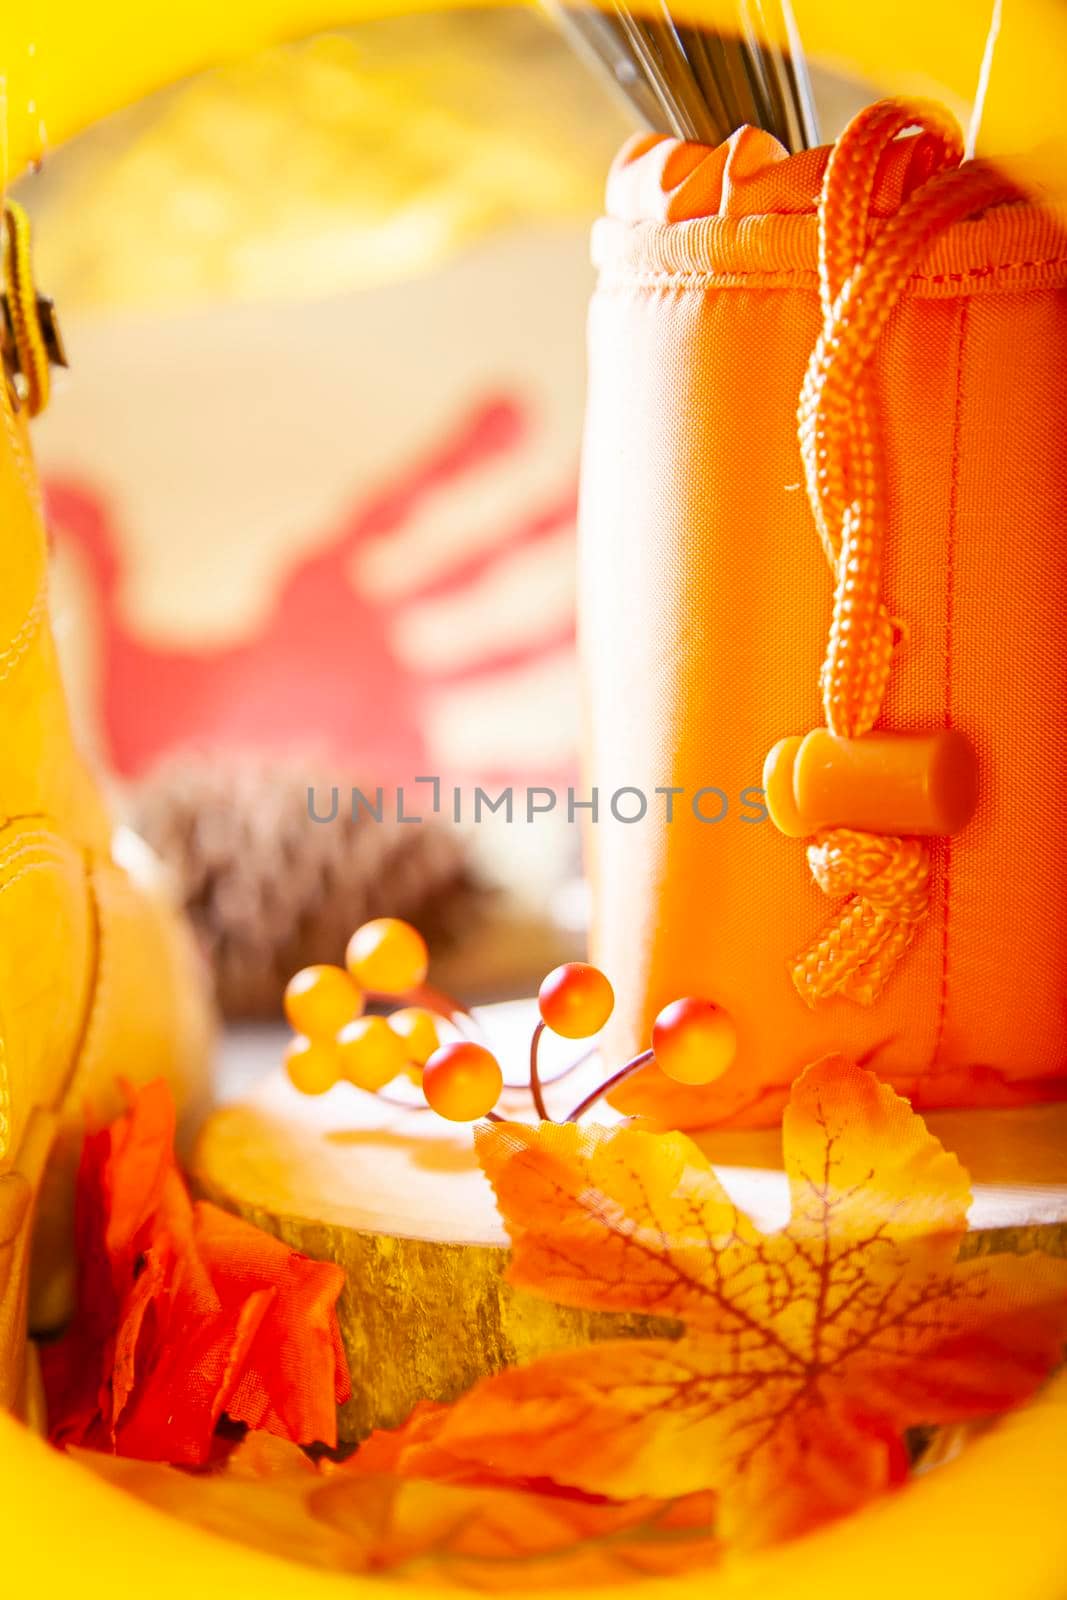 Hunter orange pouch on a wooden slab next to orange and red berries and leaves and a boot with a pinecone and a red hand turkey in the background